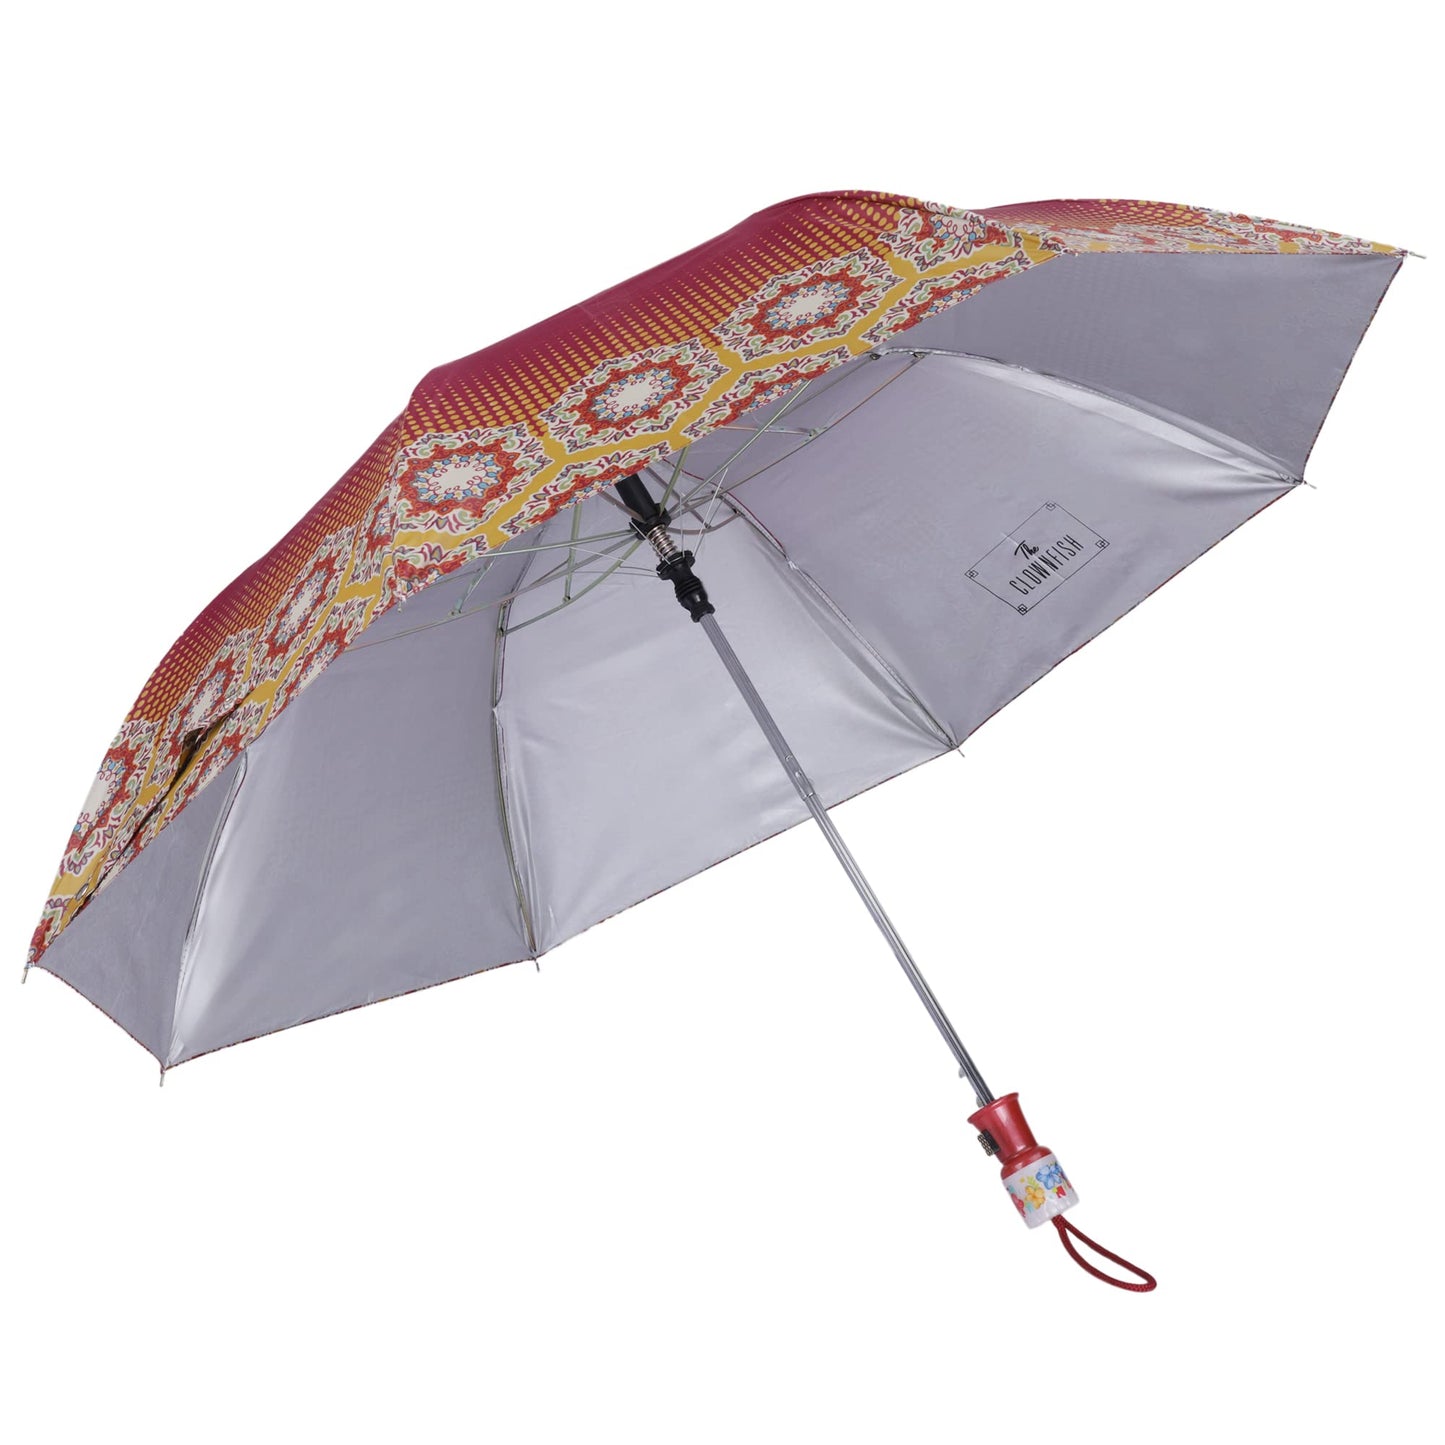 THE CLOWNFISH Umbrella 2- Fold Auto Open Waterproof 190 T Polyester Double Coated Silver Lined Umbrellas For Men and Women